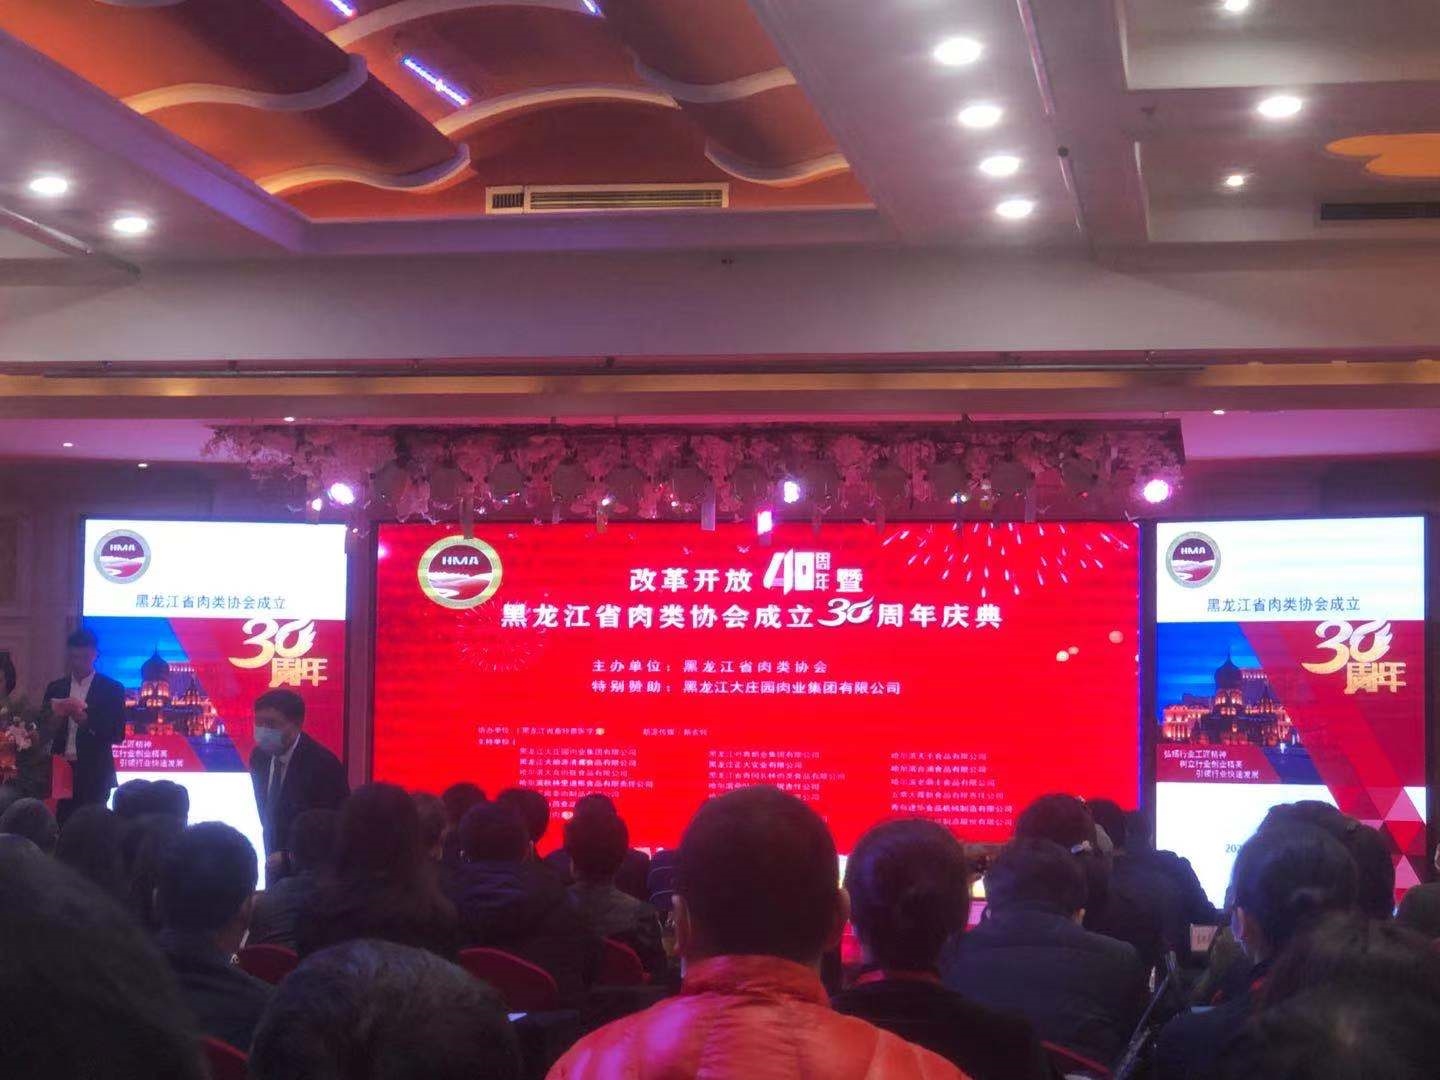 Celebrating the 30th Anniversary of the Heilongjiang Meat Association